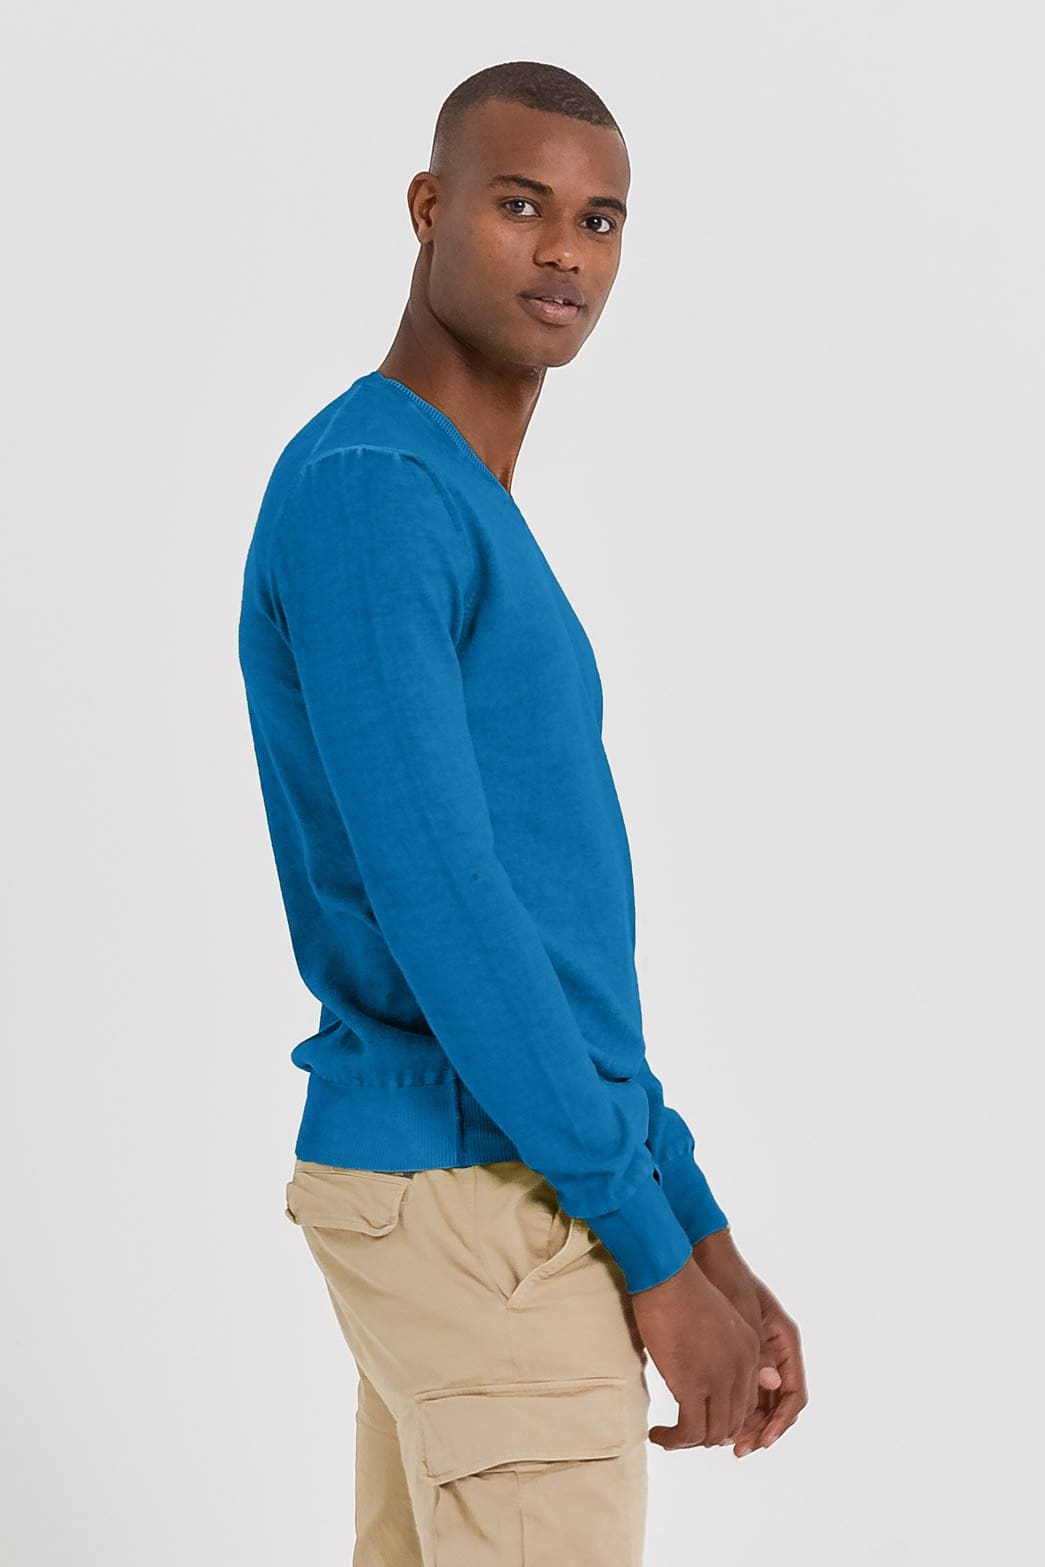 V-Neck Cotton Sweater - Mistral - Sweaters